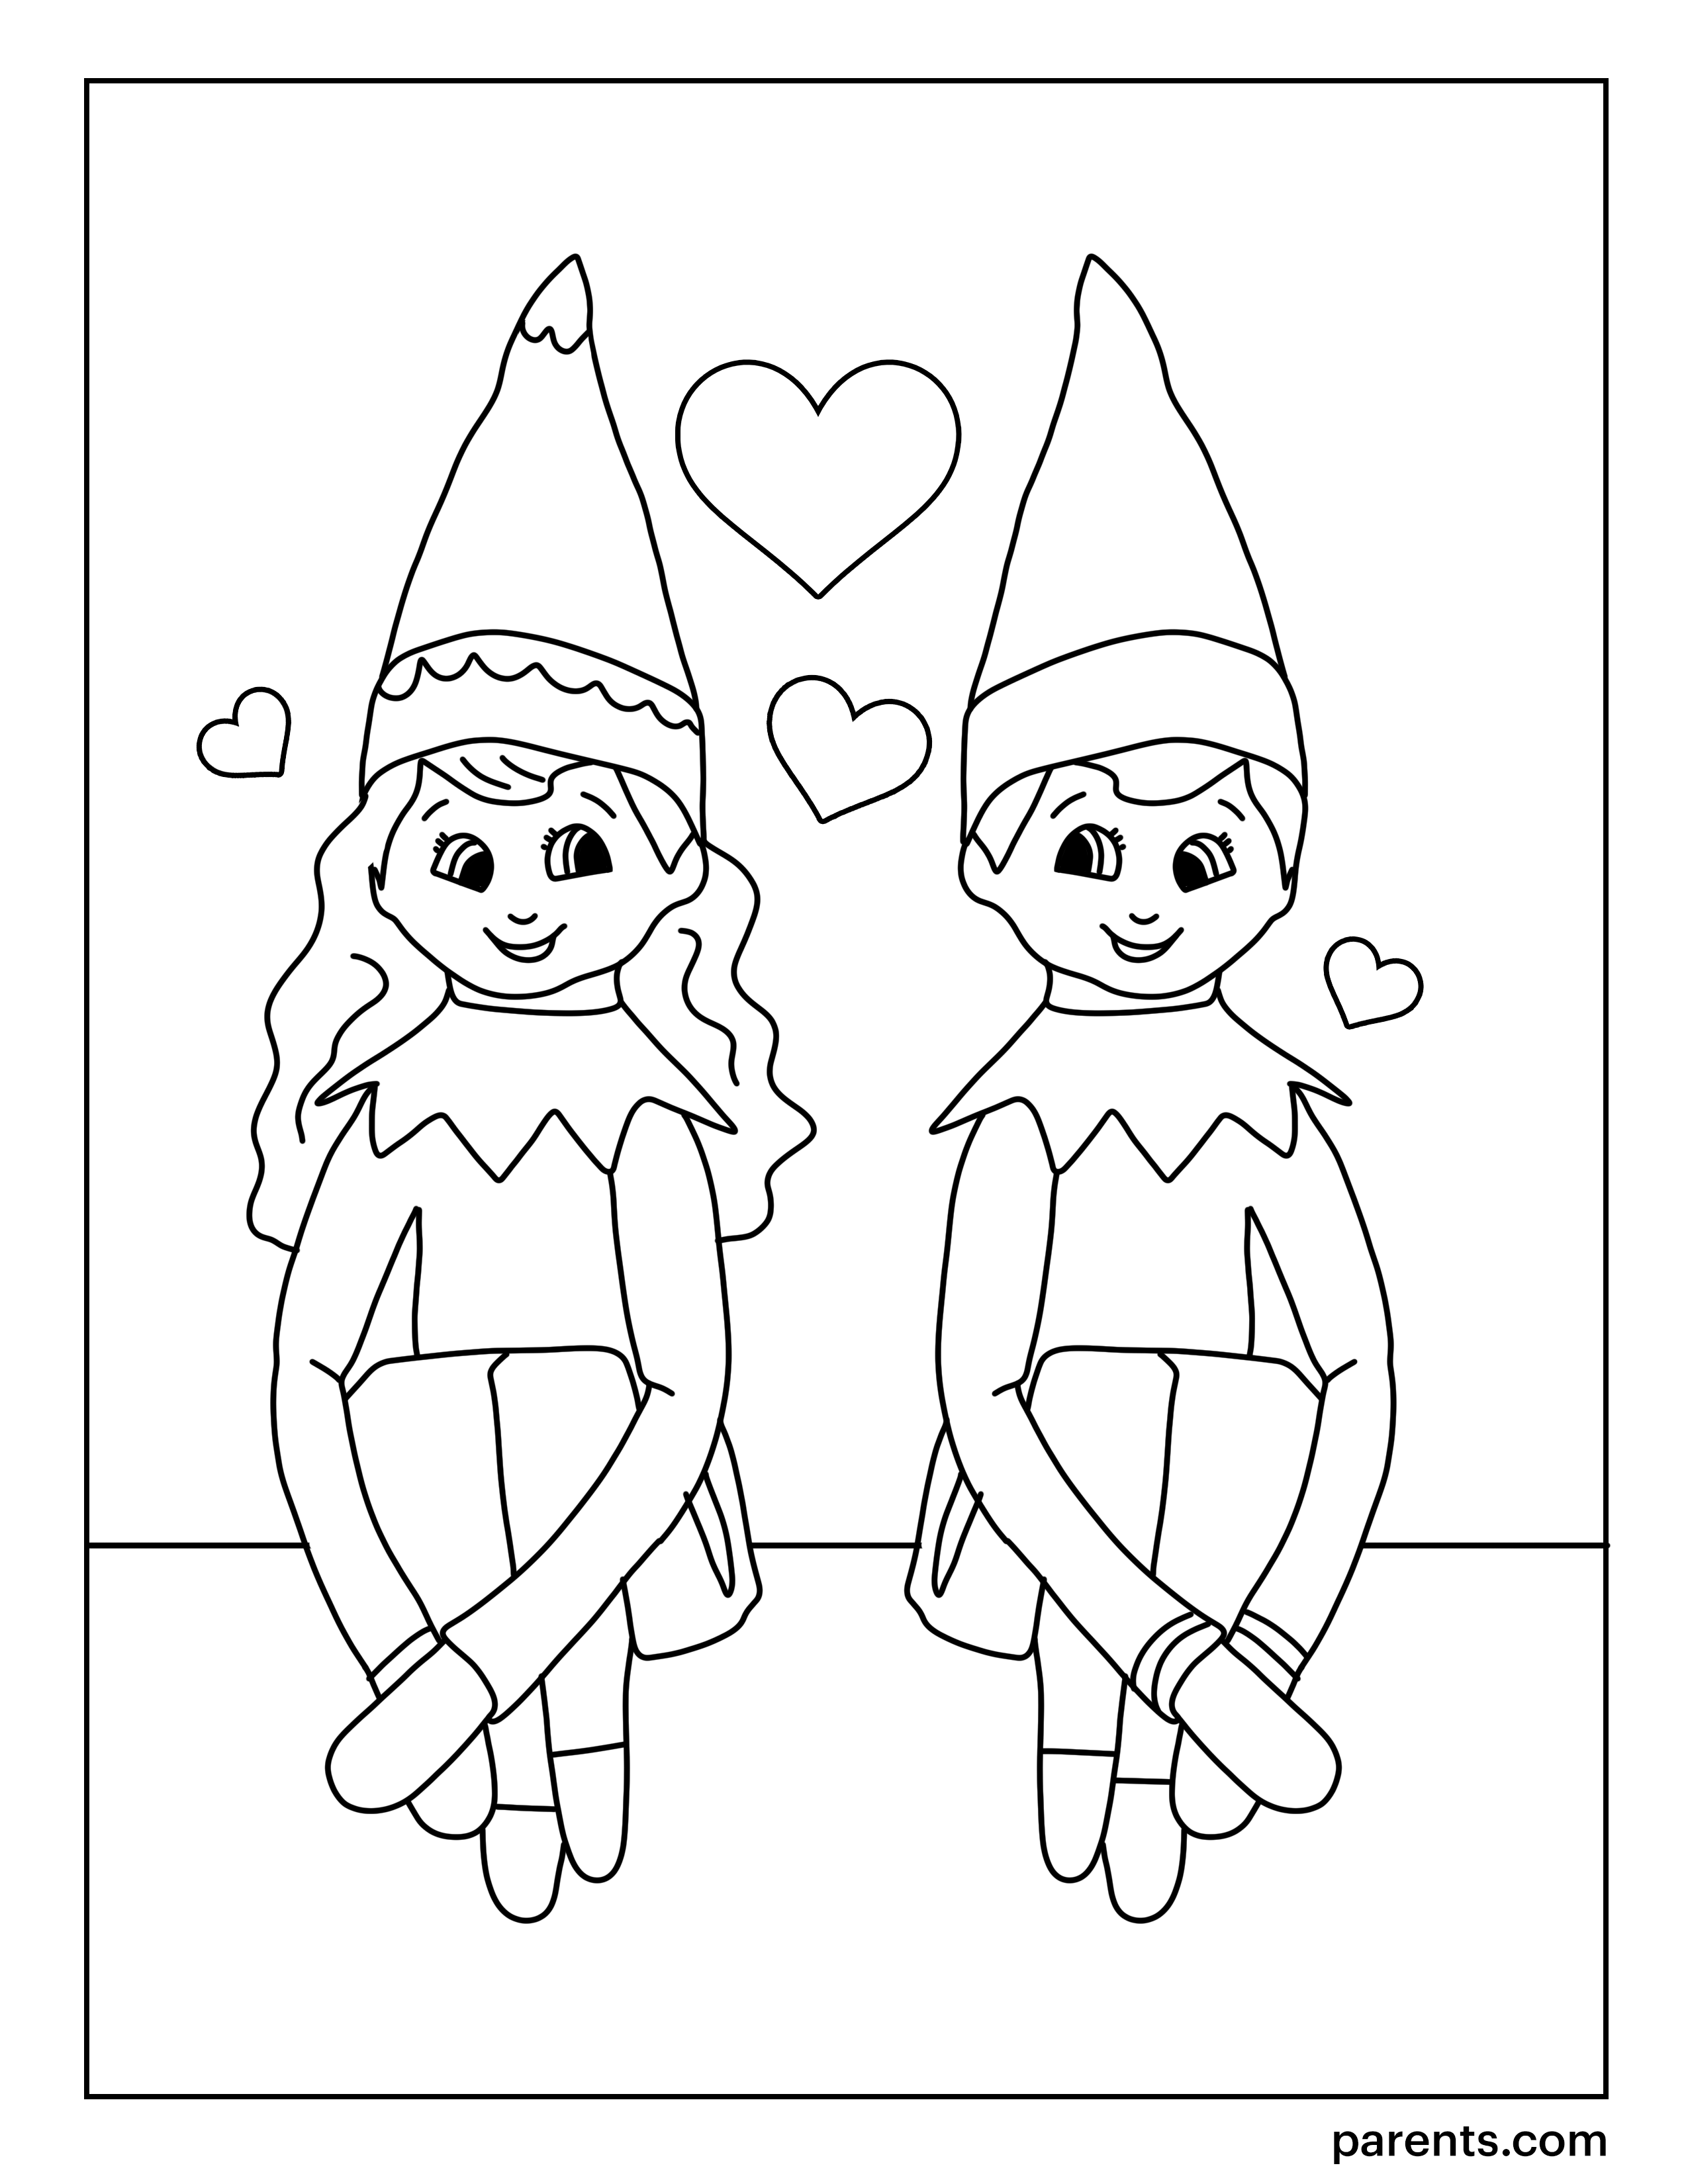 7 Elf on the Shelf Inspired Coloring Pages to Get Kids Excited for  Christmas | Parents